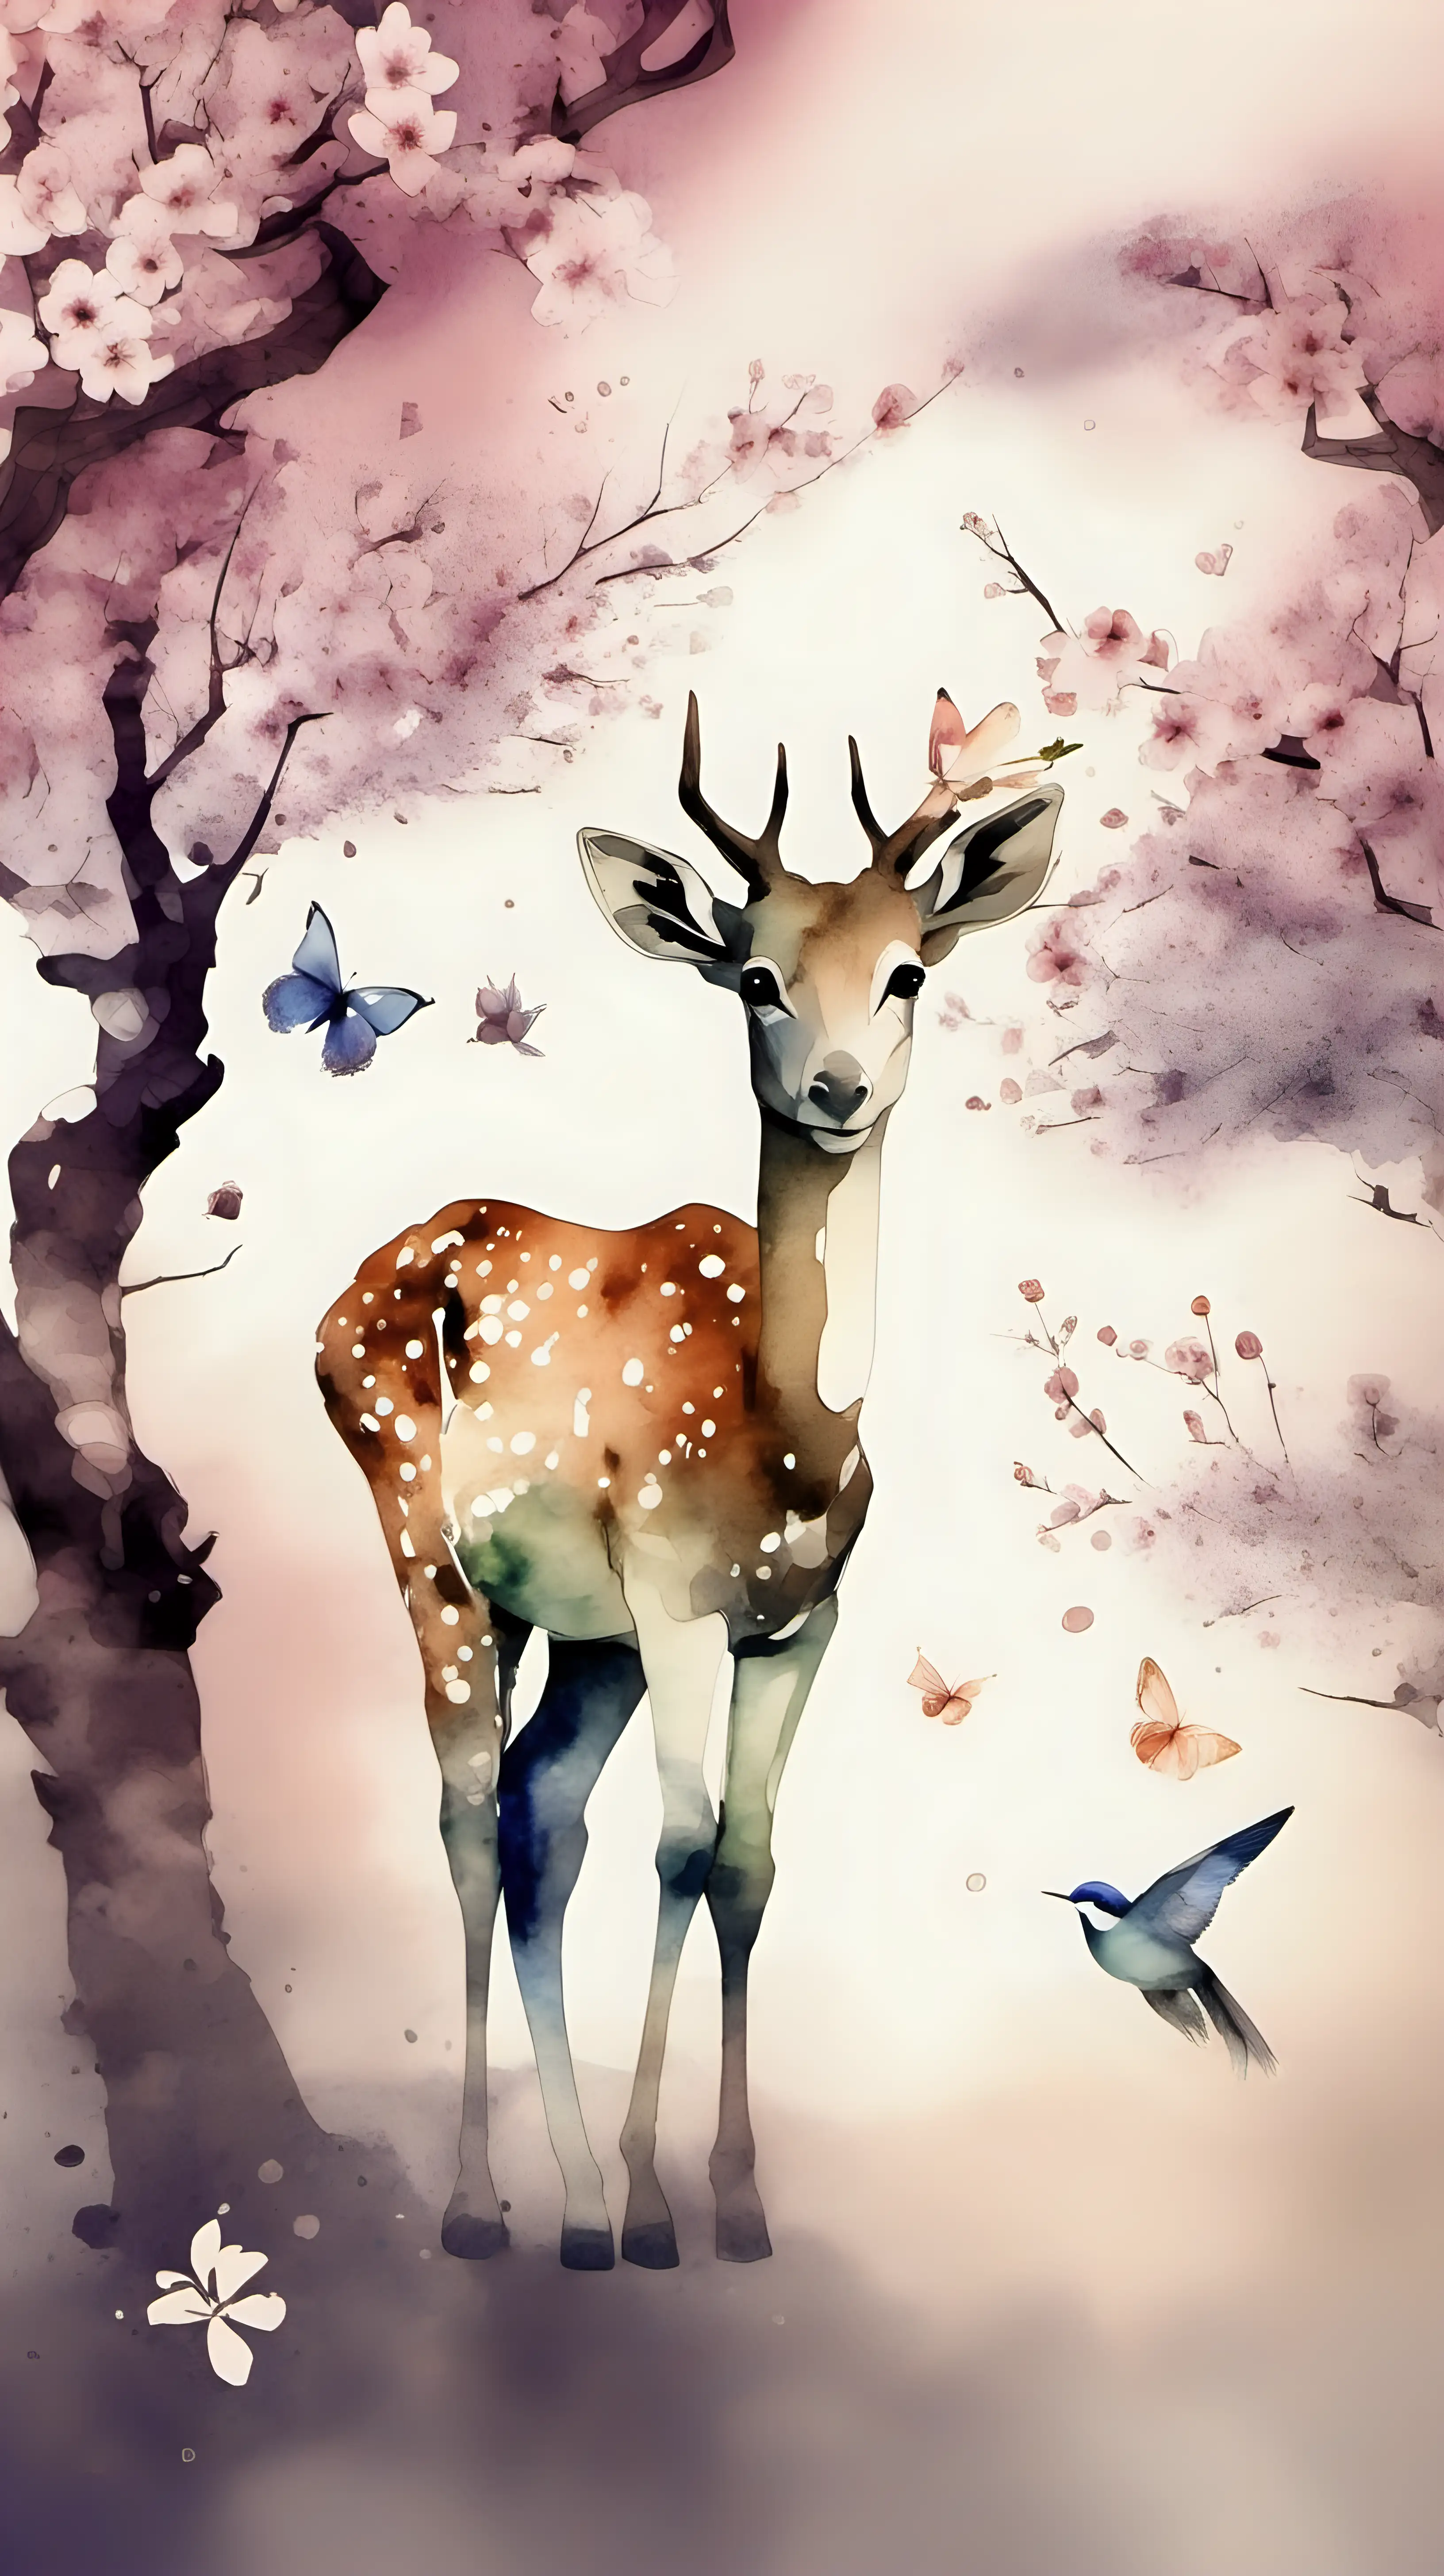 generate an image of watercolor ANIMAL with blossom trees